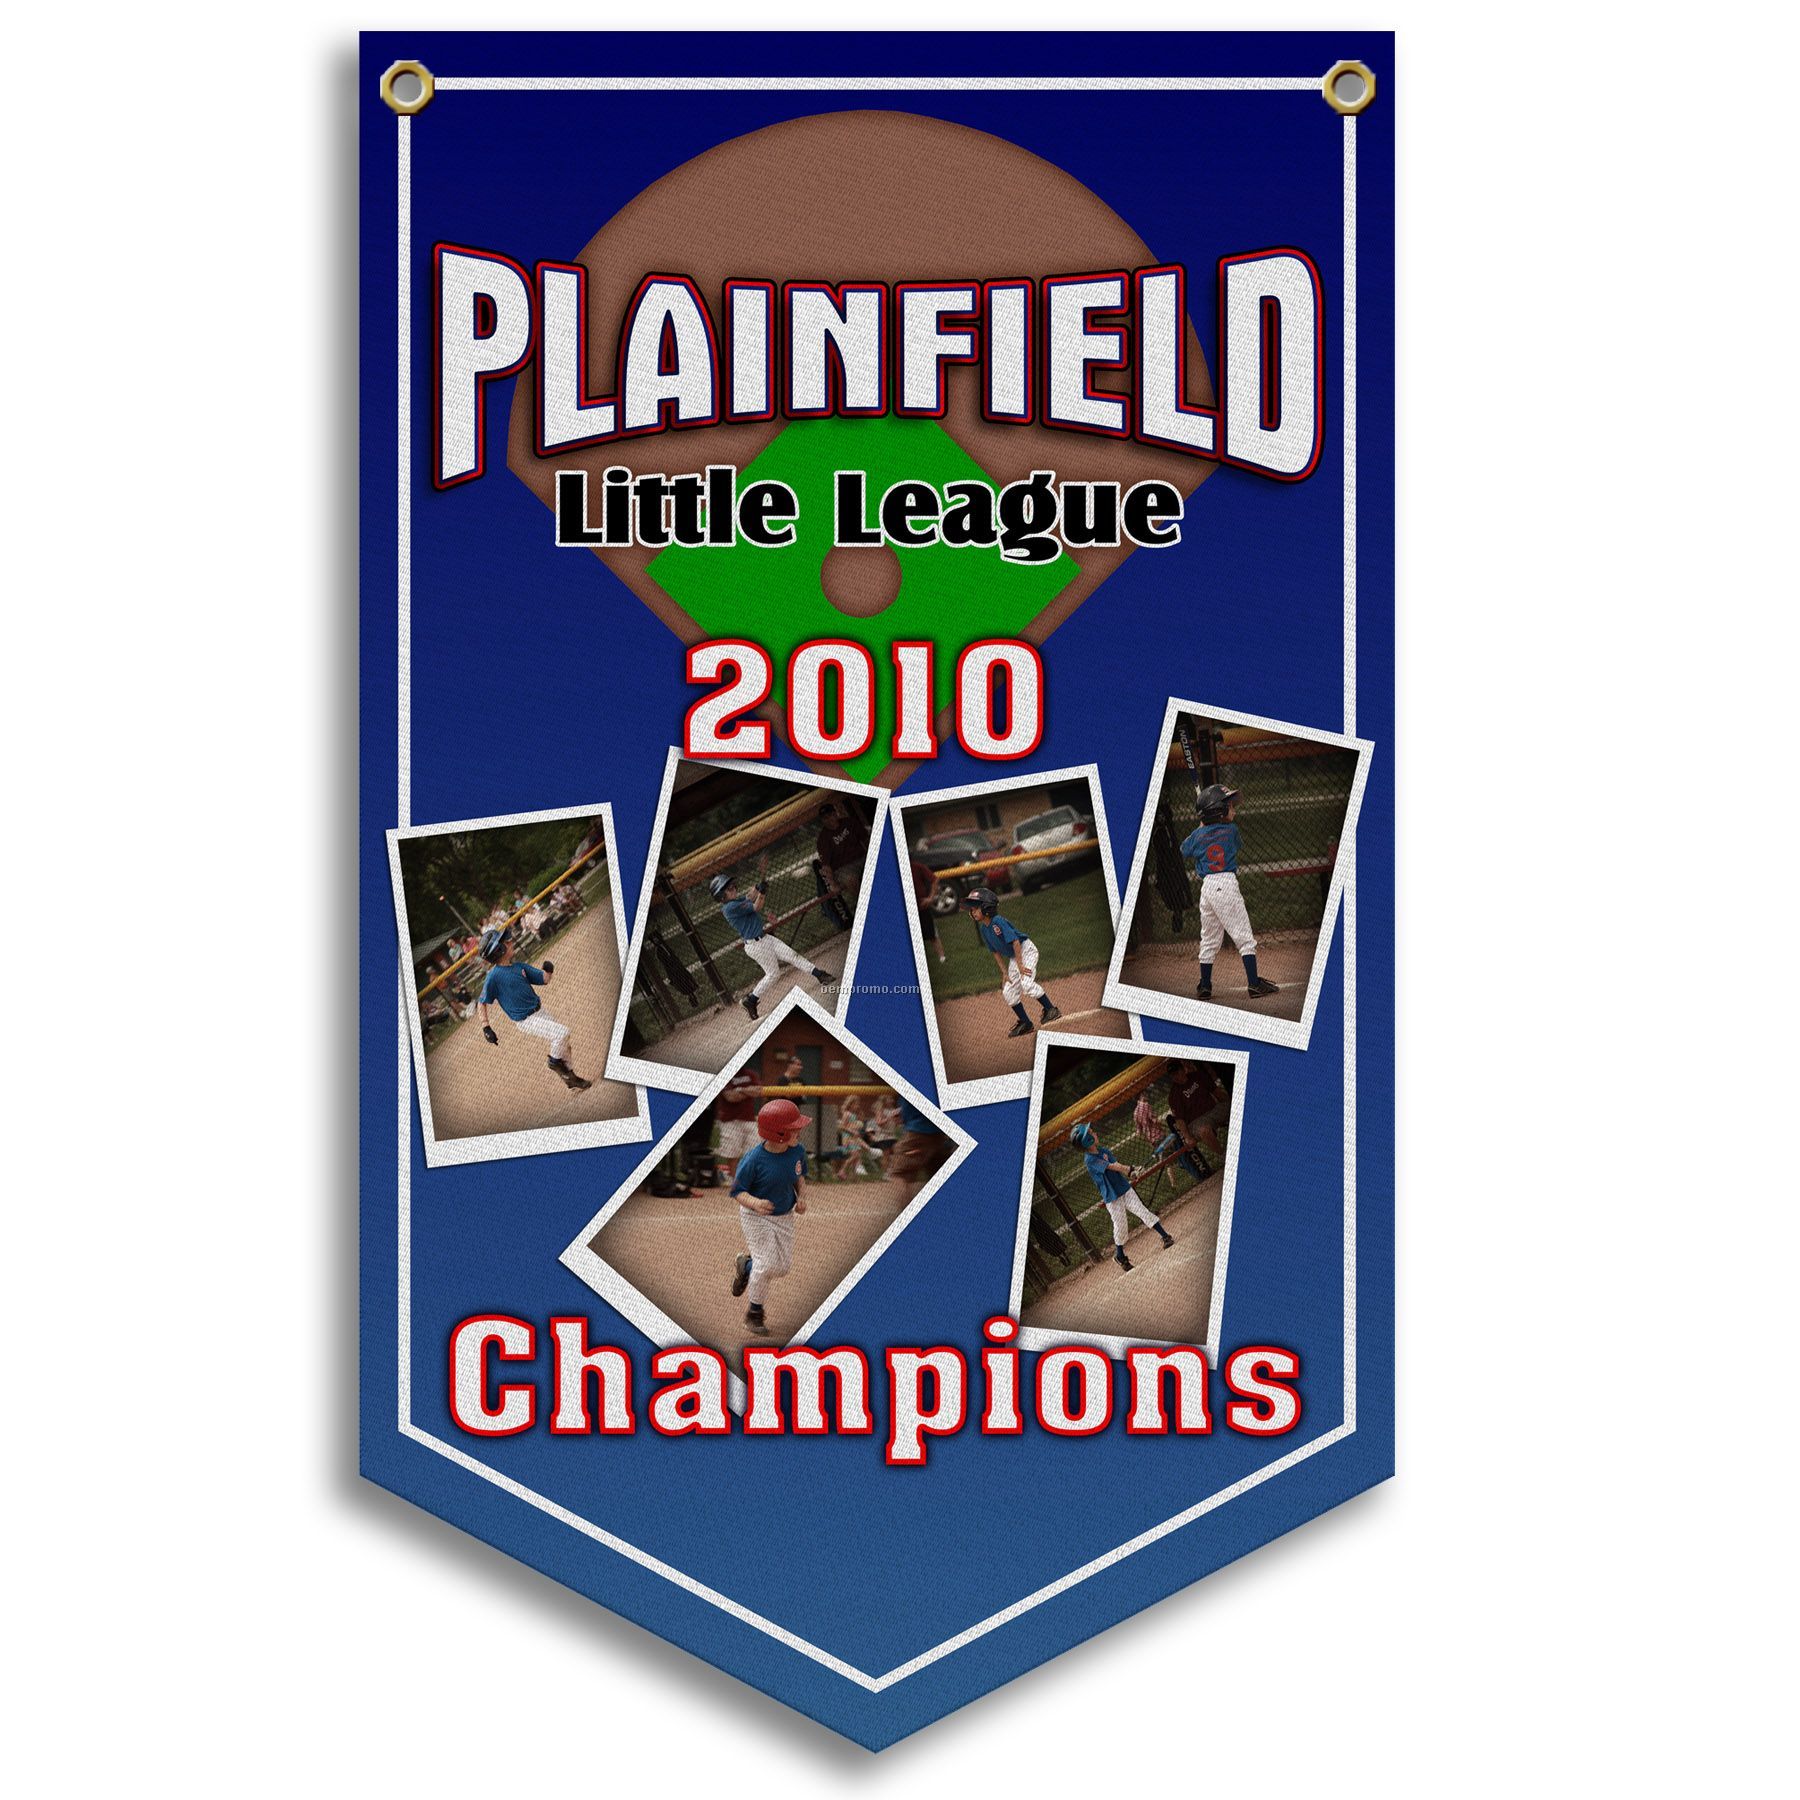 Championship Banners - 2' X 4' Full Color Imprint